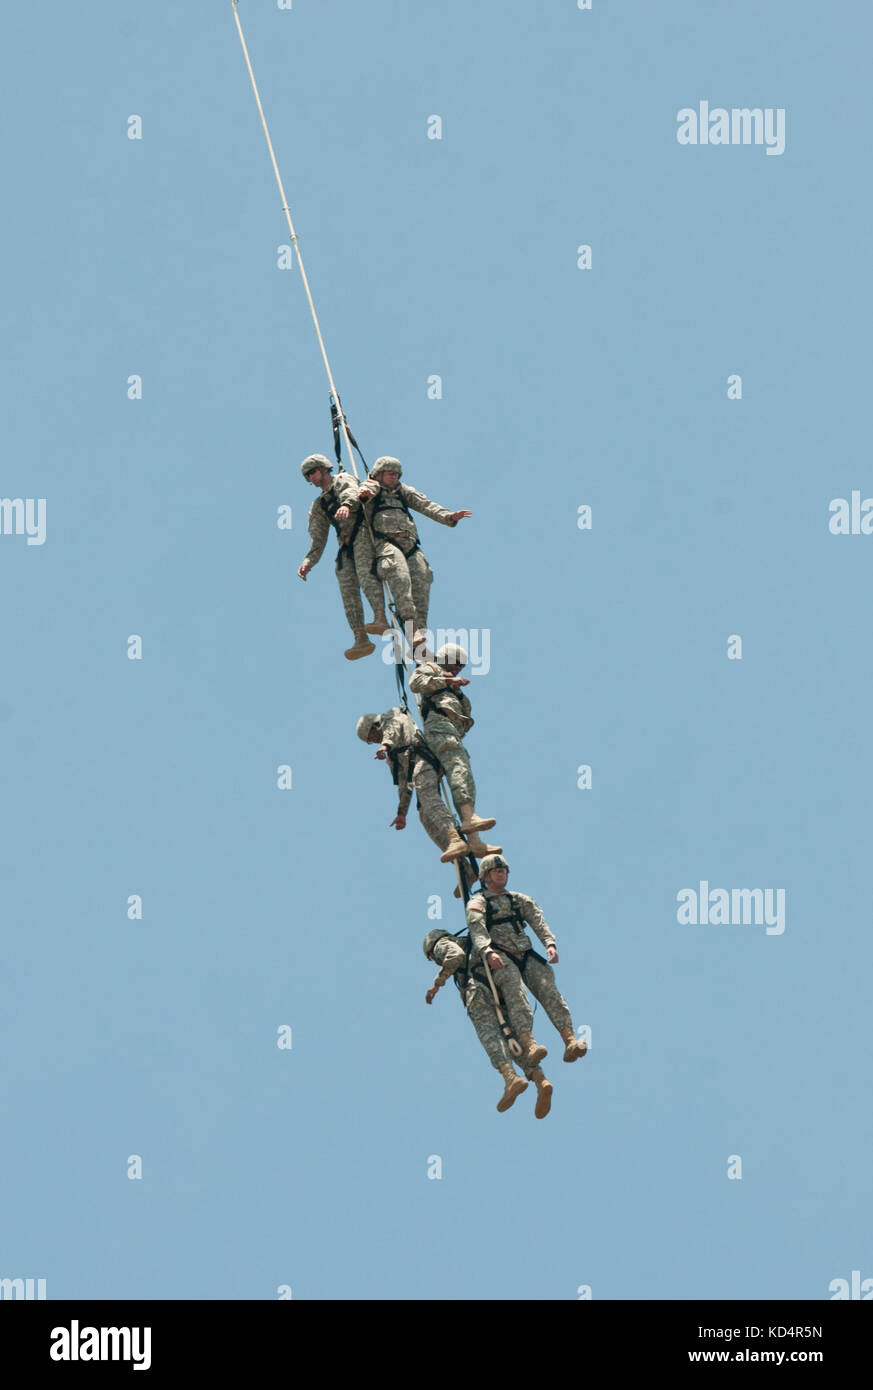 Six U.S. Army Soldiers assigned to 4th Battalion, 118th Infantry Regiment, South Carolina Army National Guard, fly through the air while tethered from an MH47G Chinook provided by the 160th Special Operations Aviation Regiment (Airborne) during Special Insertion Exfiltration System training at McCrady Training Center, Eastover, S.C., May 17, 2014.  The 160th SOAR (A) supported a joint mission with 7th Special Forces Group (Airborne) training over 100 Soldiers assigned to 4th Battalion, 118th Infantry Regiment, South Carolina Army National Guard during drill weekend. (U.S. Army National Guard p Stock Photo